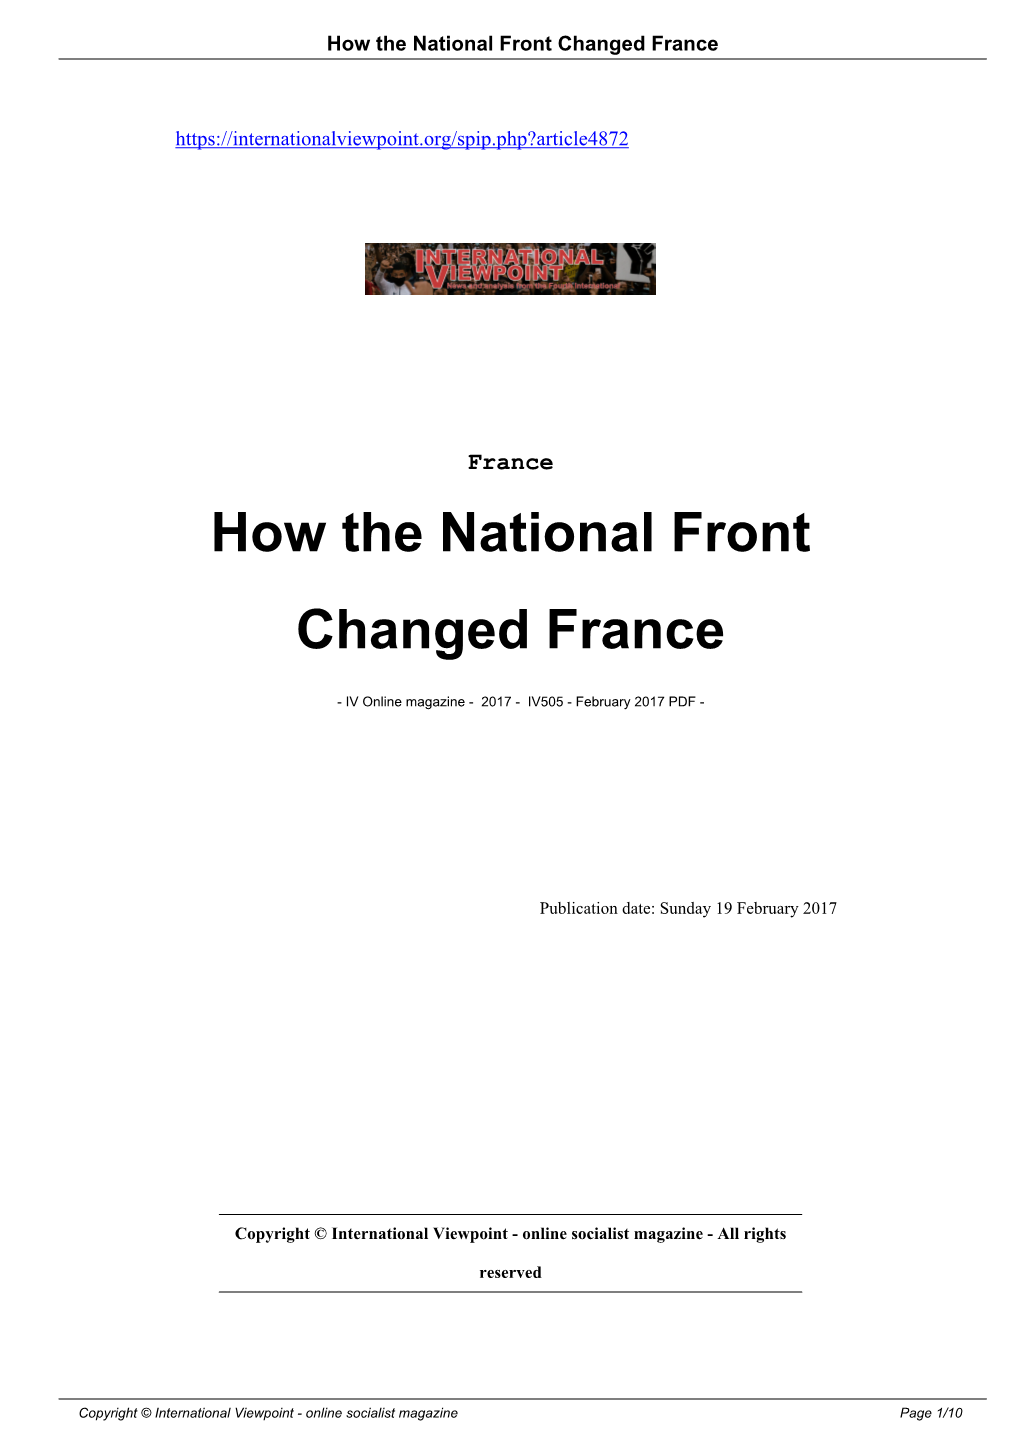 How the National Front Changed France